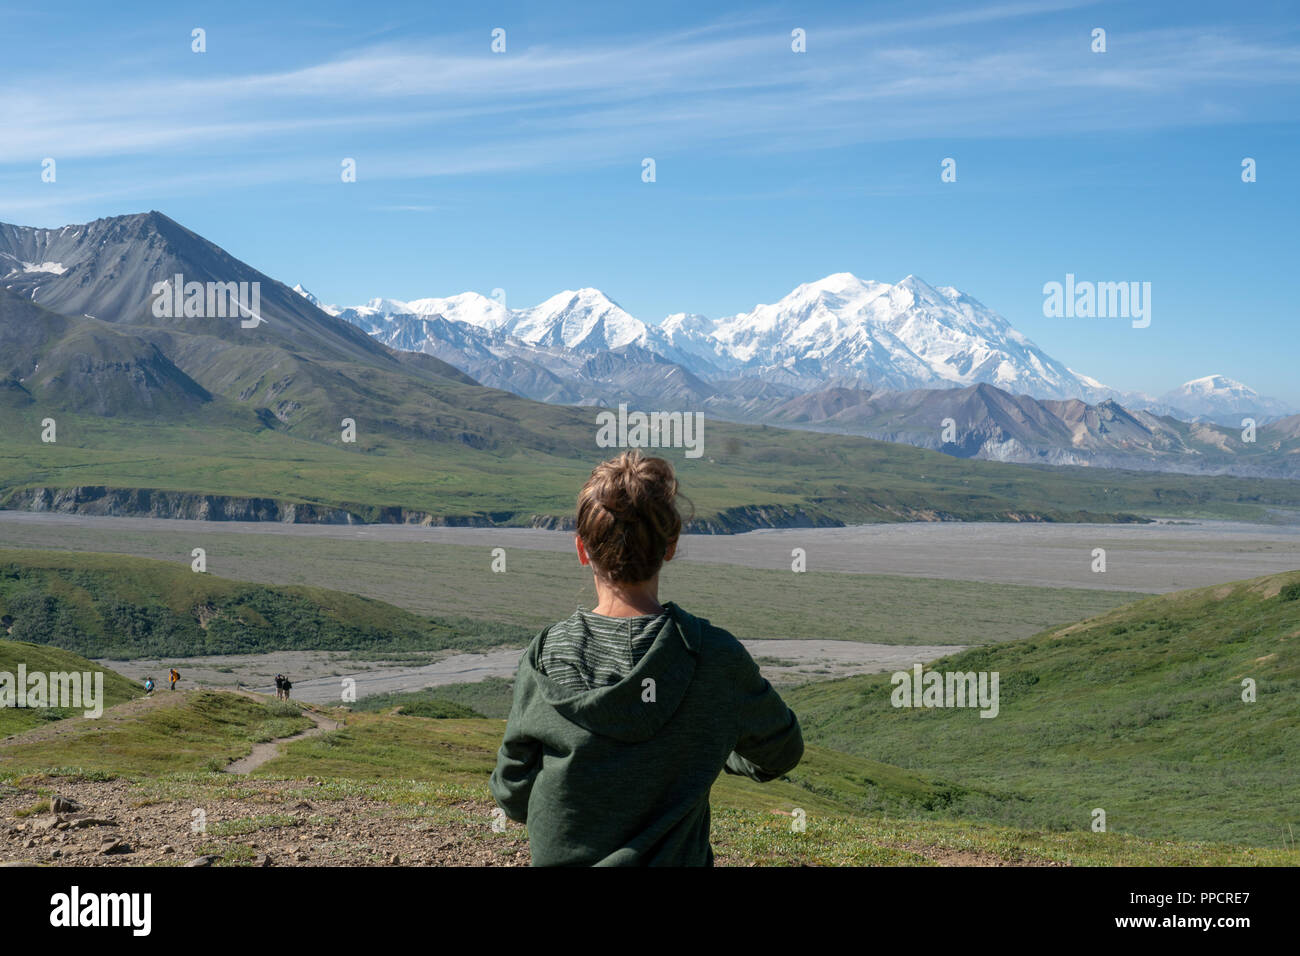 Adult female stands in front of Denali mountains in the Alaska Range of Denali National Park. Concept for solo female travel, confidence Stock Photo